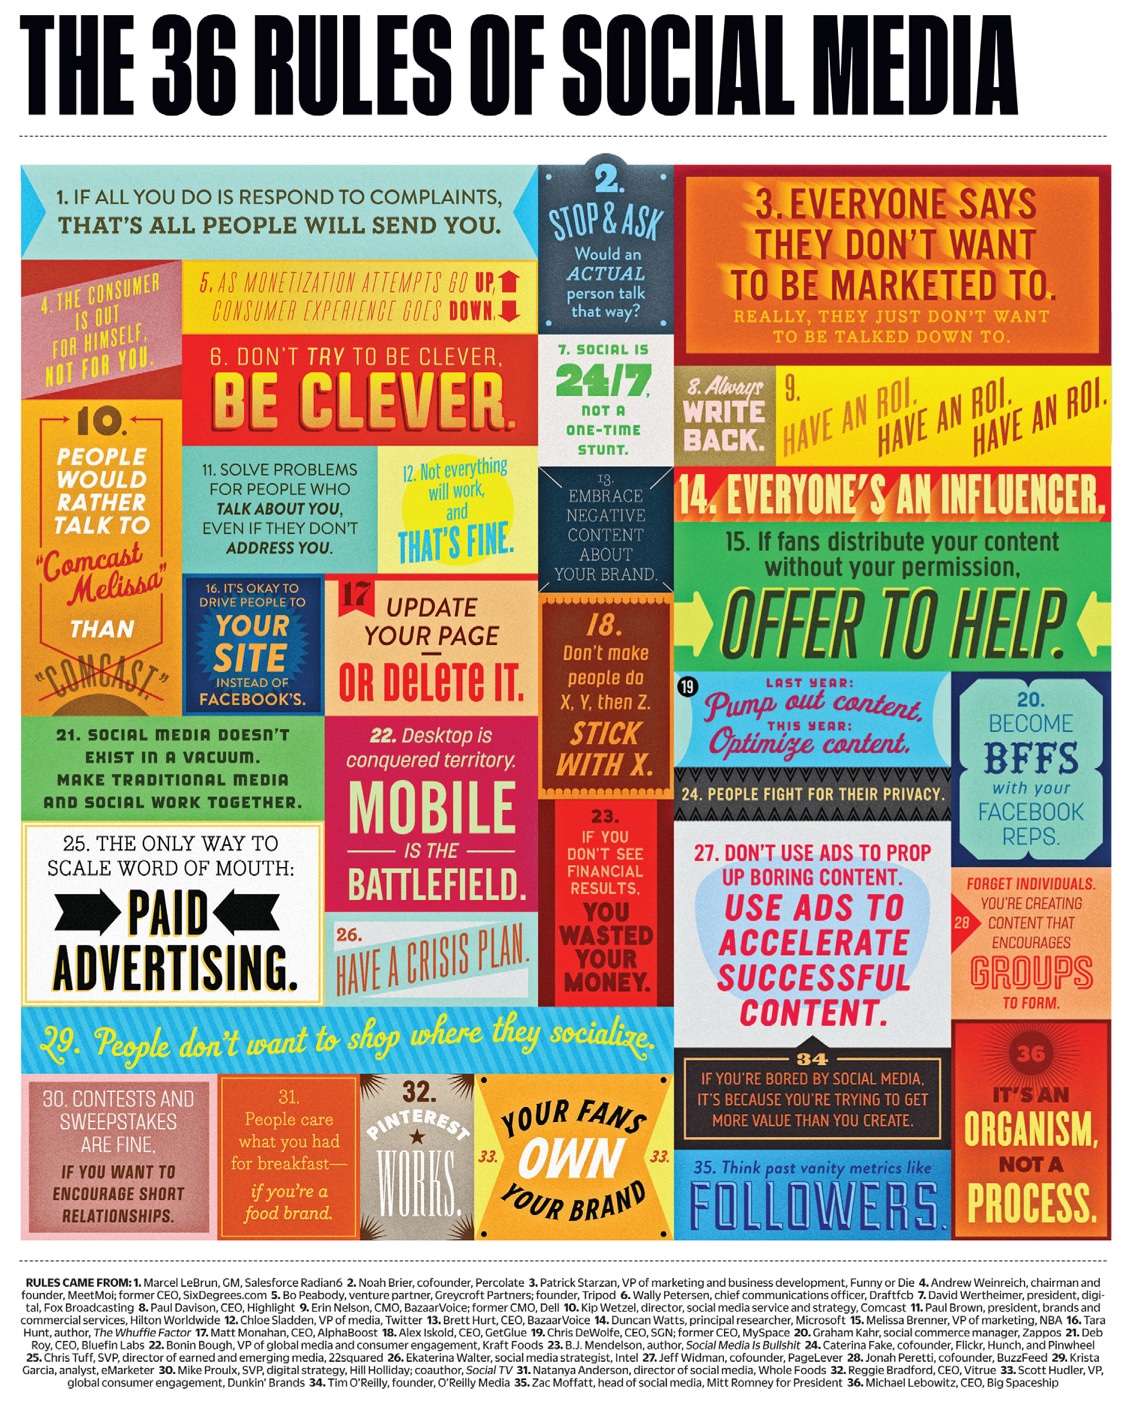 36 Rules Of Social Media: Your Social Media Plan [Infographic]